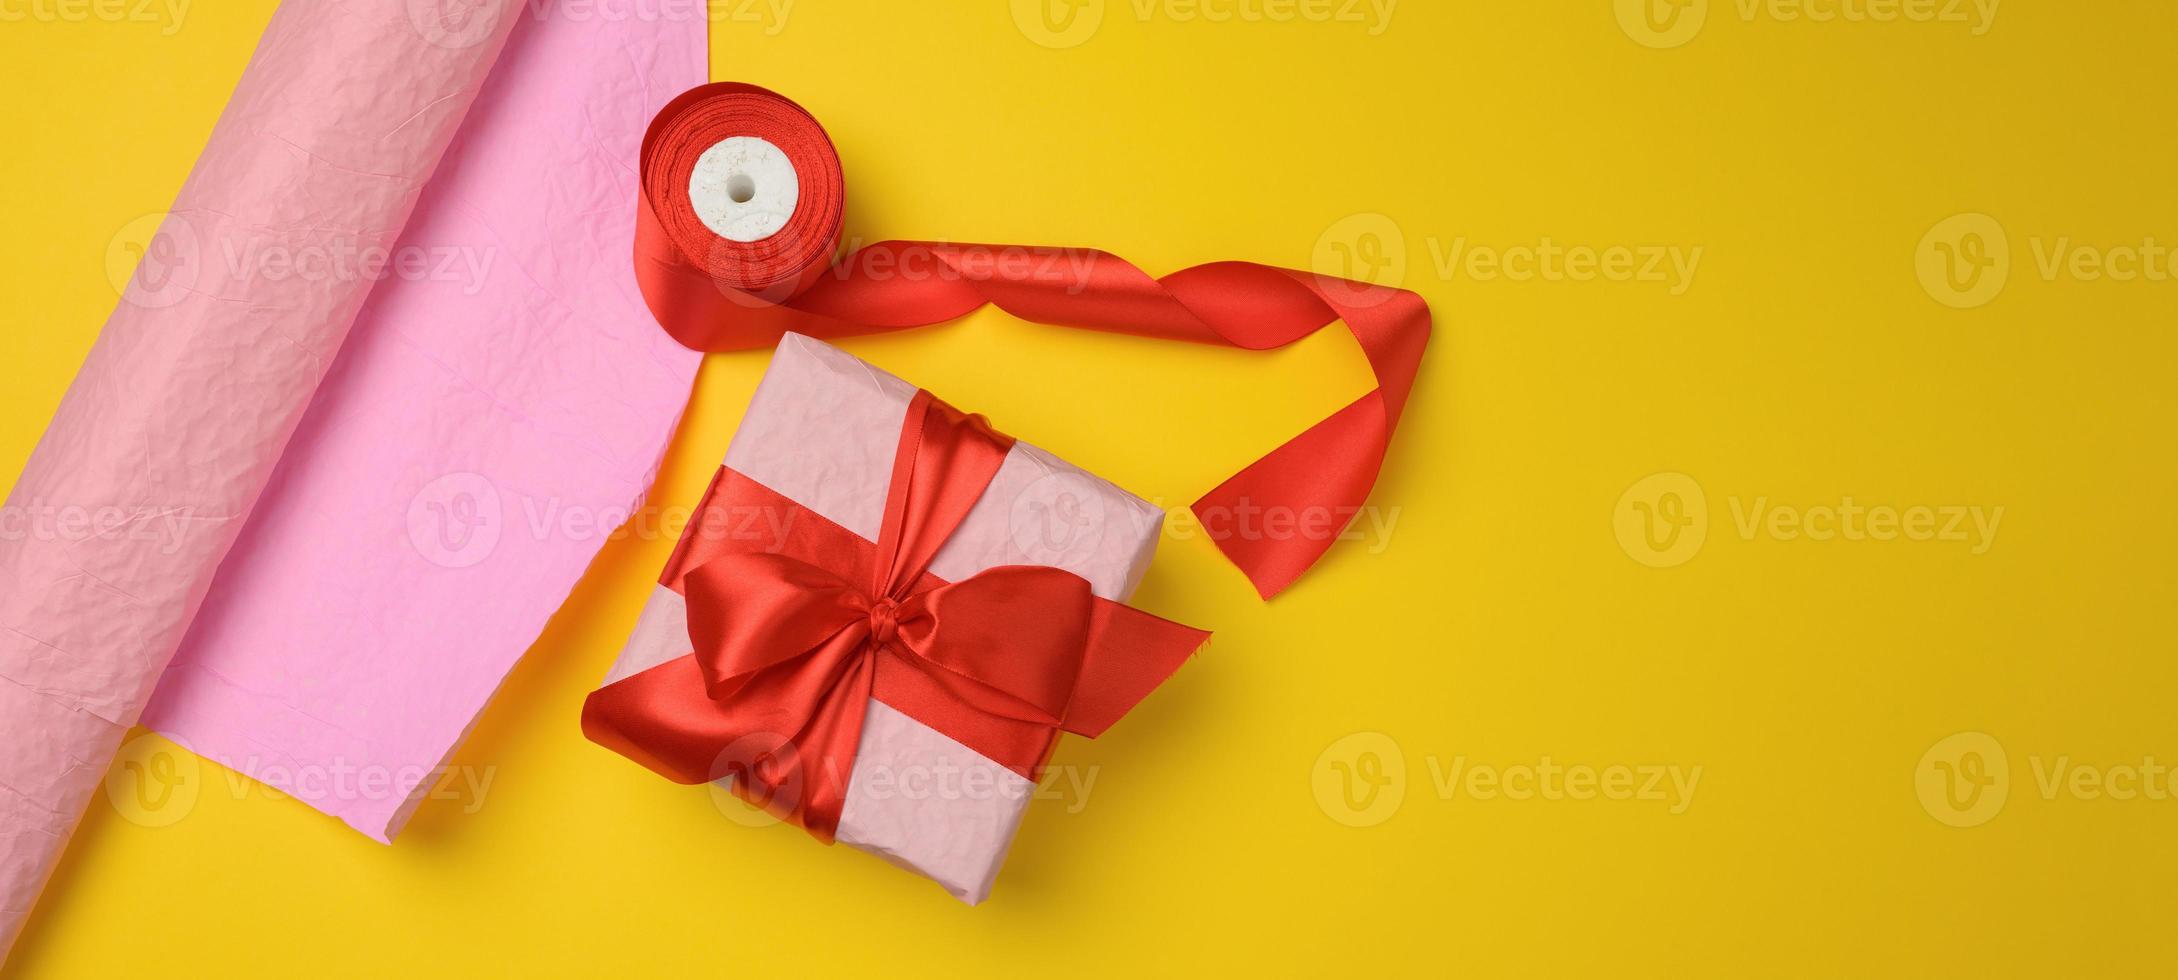 pink gift box wrapped in red silk ribbon on yellow background, top view photo